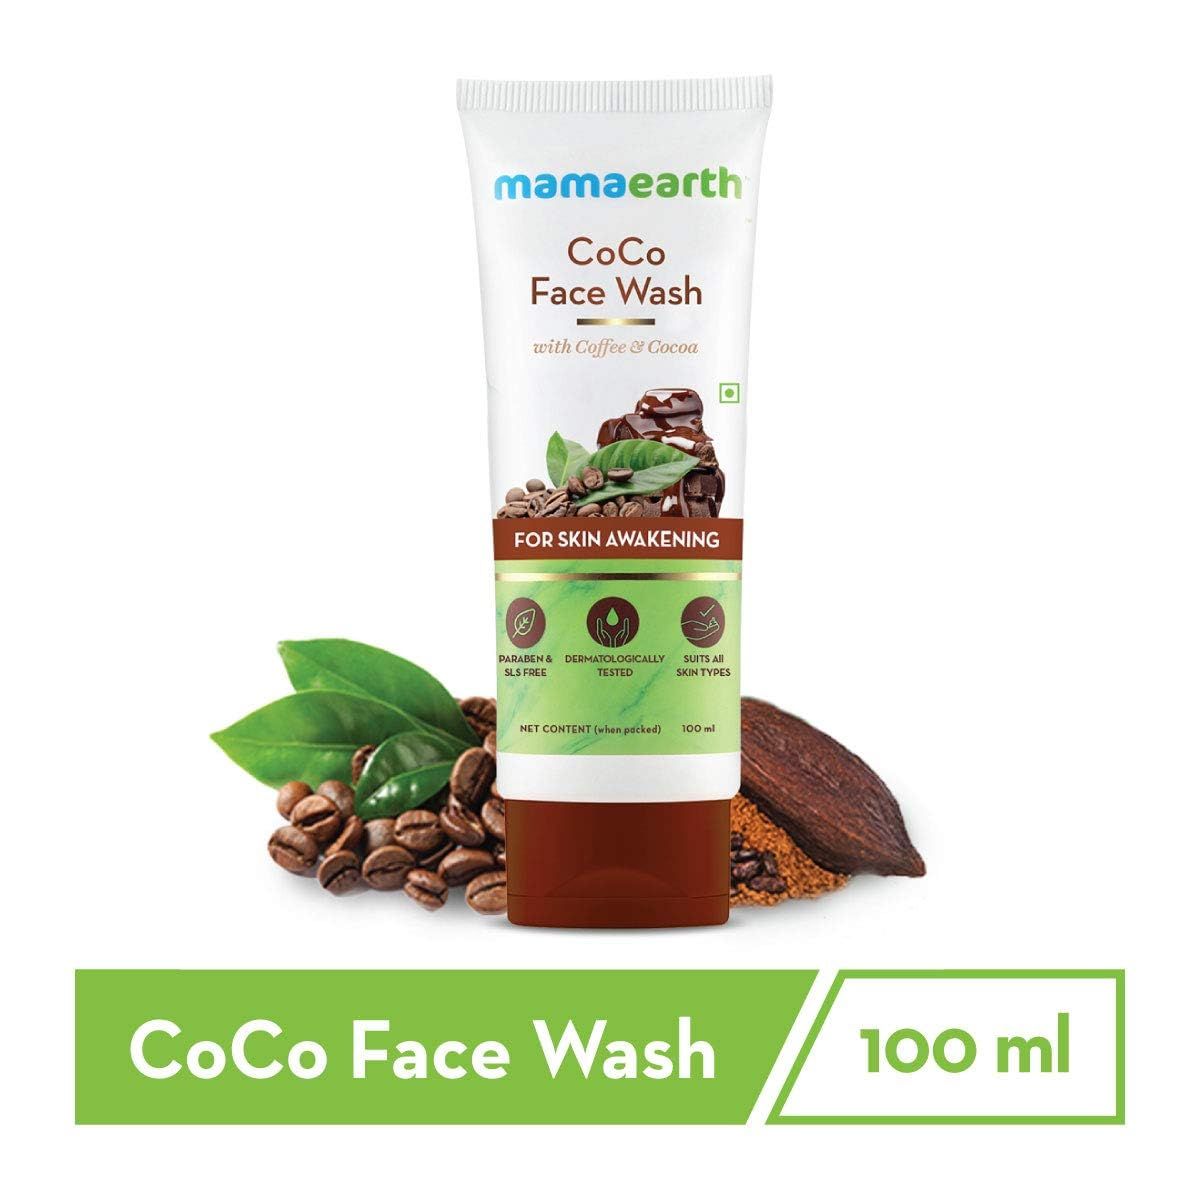 CoCo Face Wash with Coffee and Cocoa for Skin Awakening - 100ml